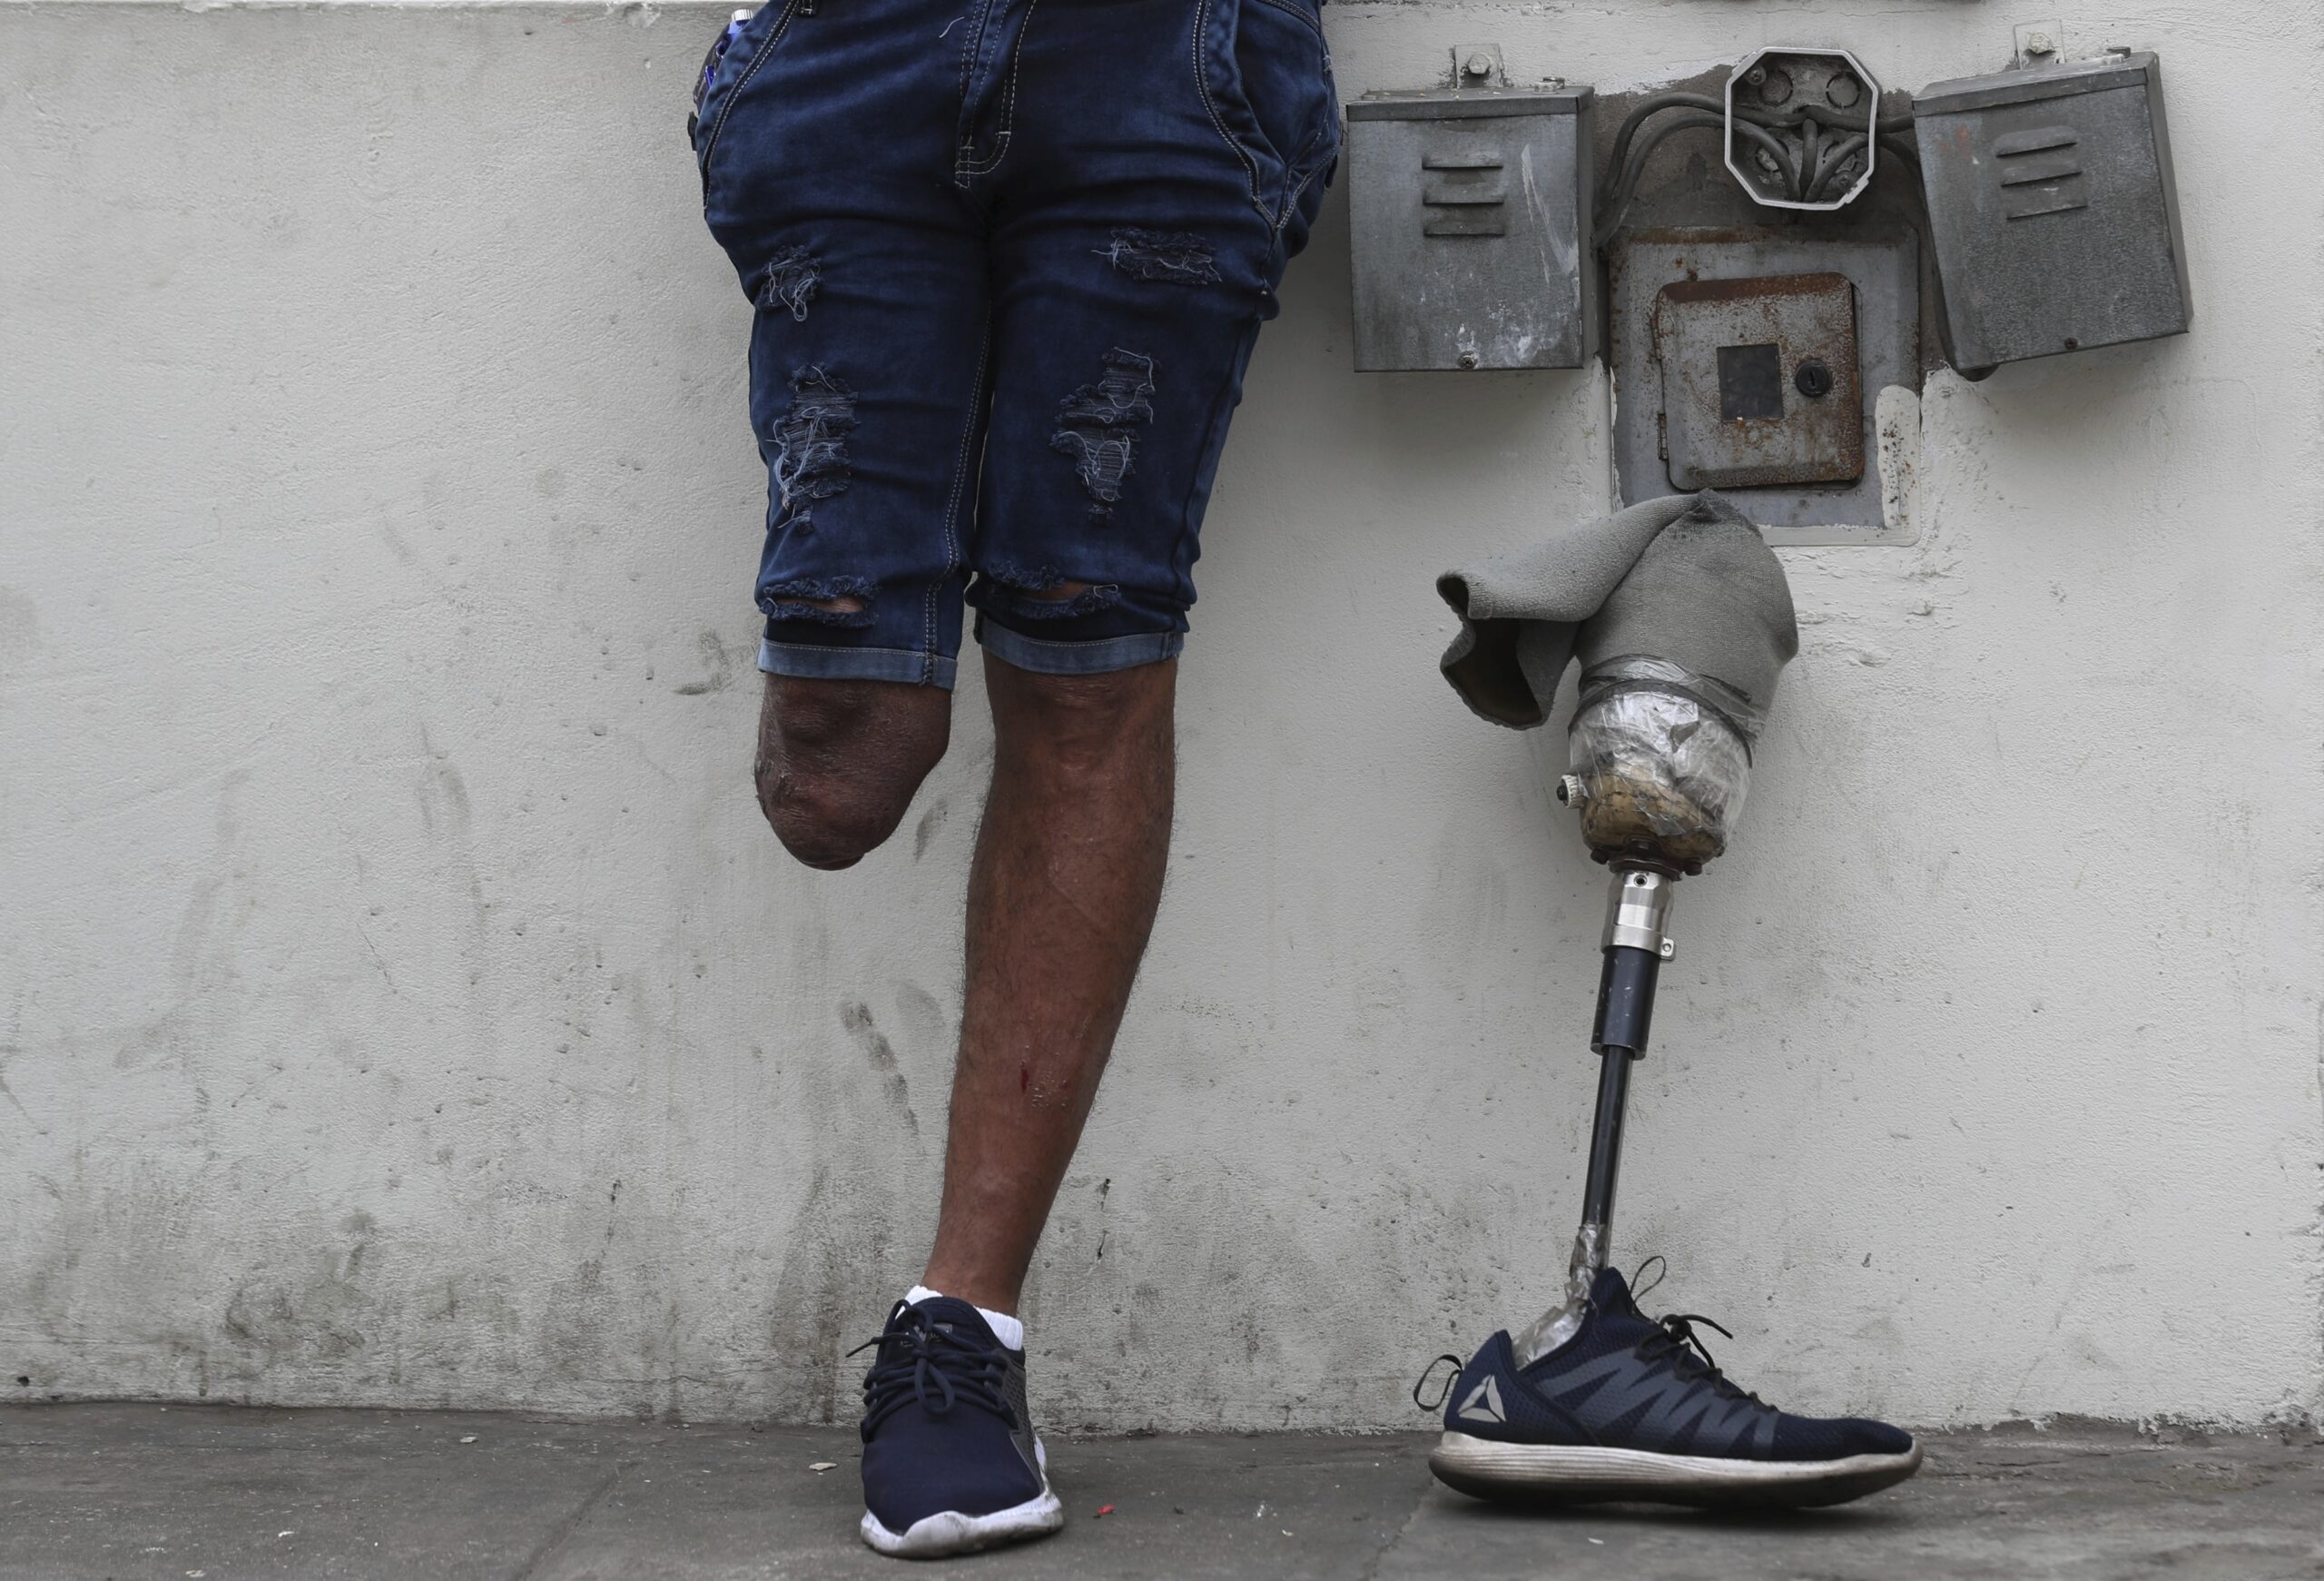 A man with an amputated leg